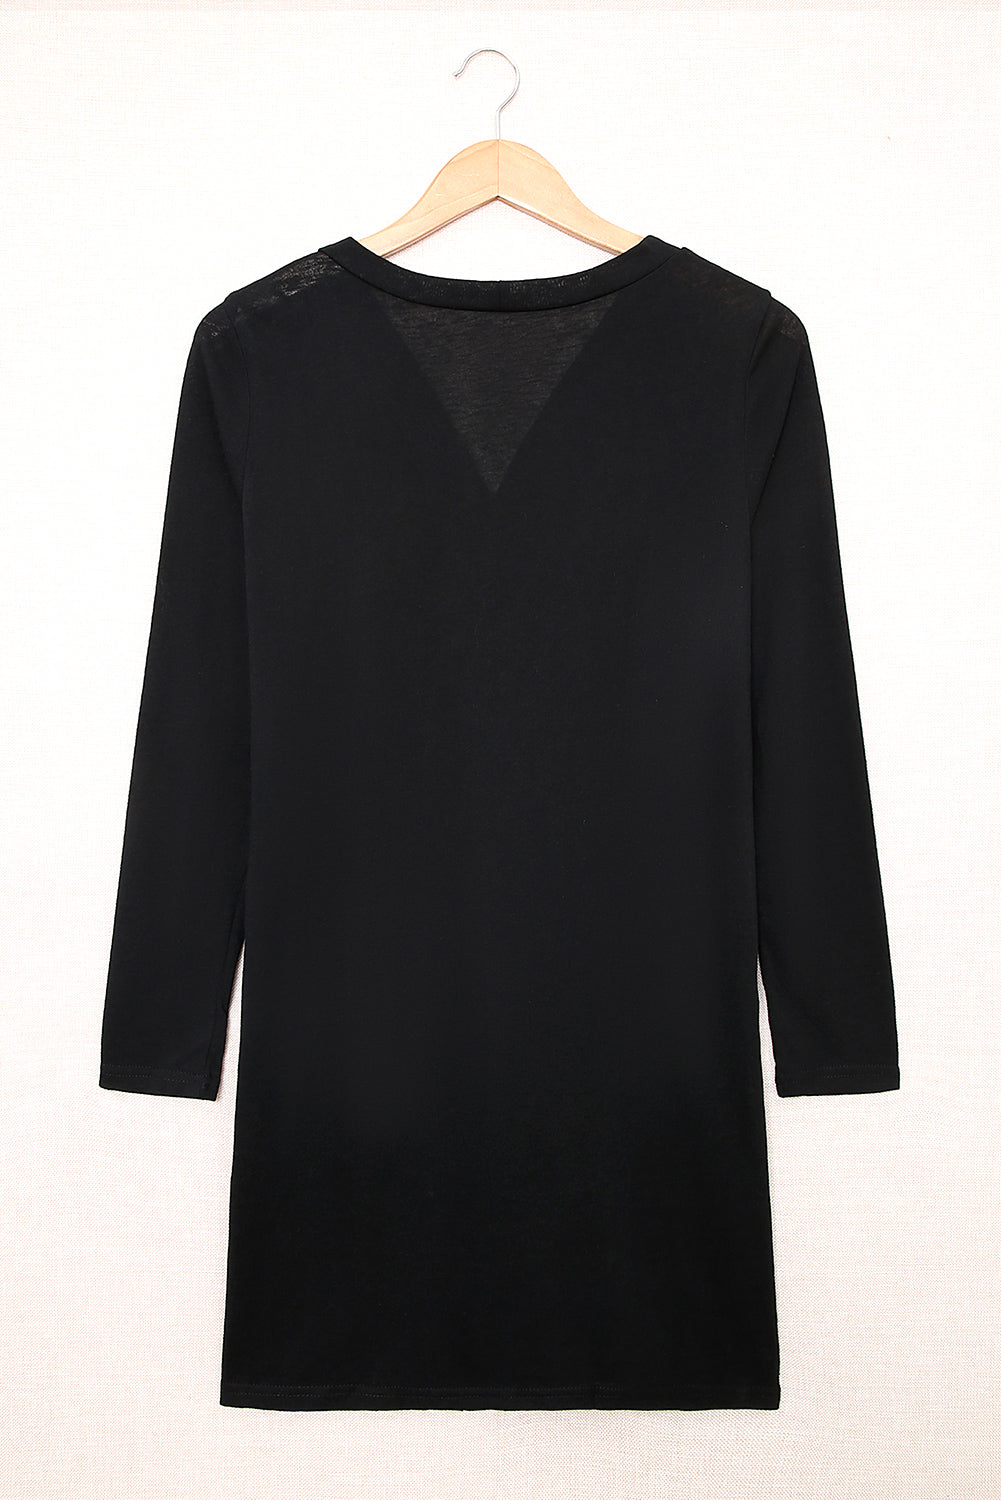 Black Casual Button Front Open Front Cover Up